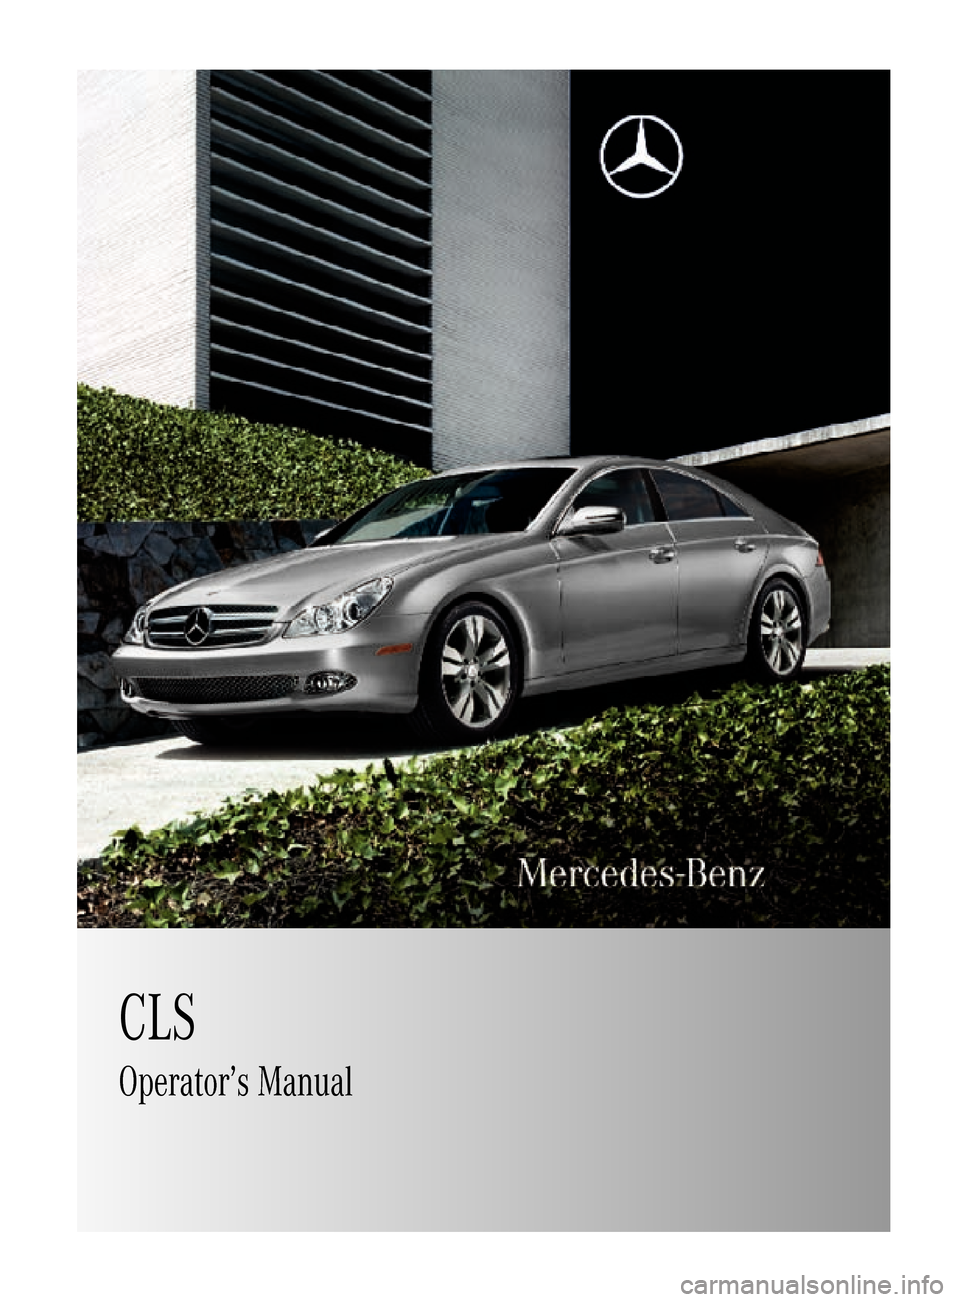 MERCEDES-BENZ CLS550 2010 W219 Owners Manual CLS
Operator’s Manual
219_AKB; 4; 54, en-US
d2ureepe,Version: 2.11.8.1 2009-05-11T16:21:02+02:00 - Seite 1    